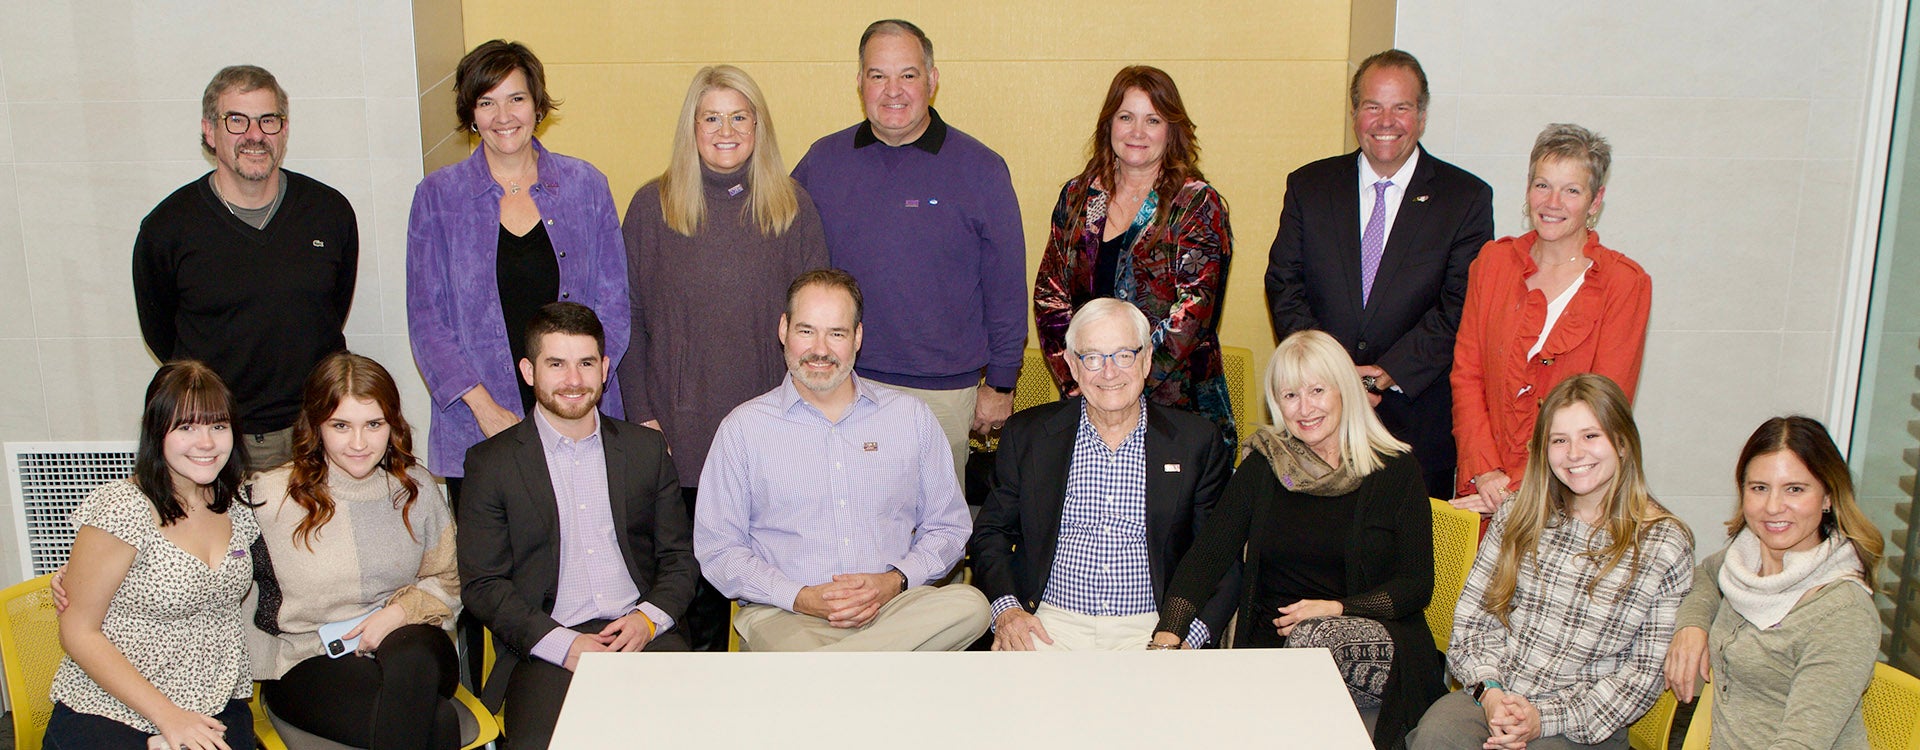 Generations of Conrads celebrate the lives of Ken and Lee Conrad in the conference room named in the couple’s memory.